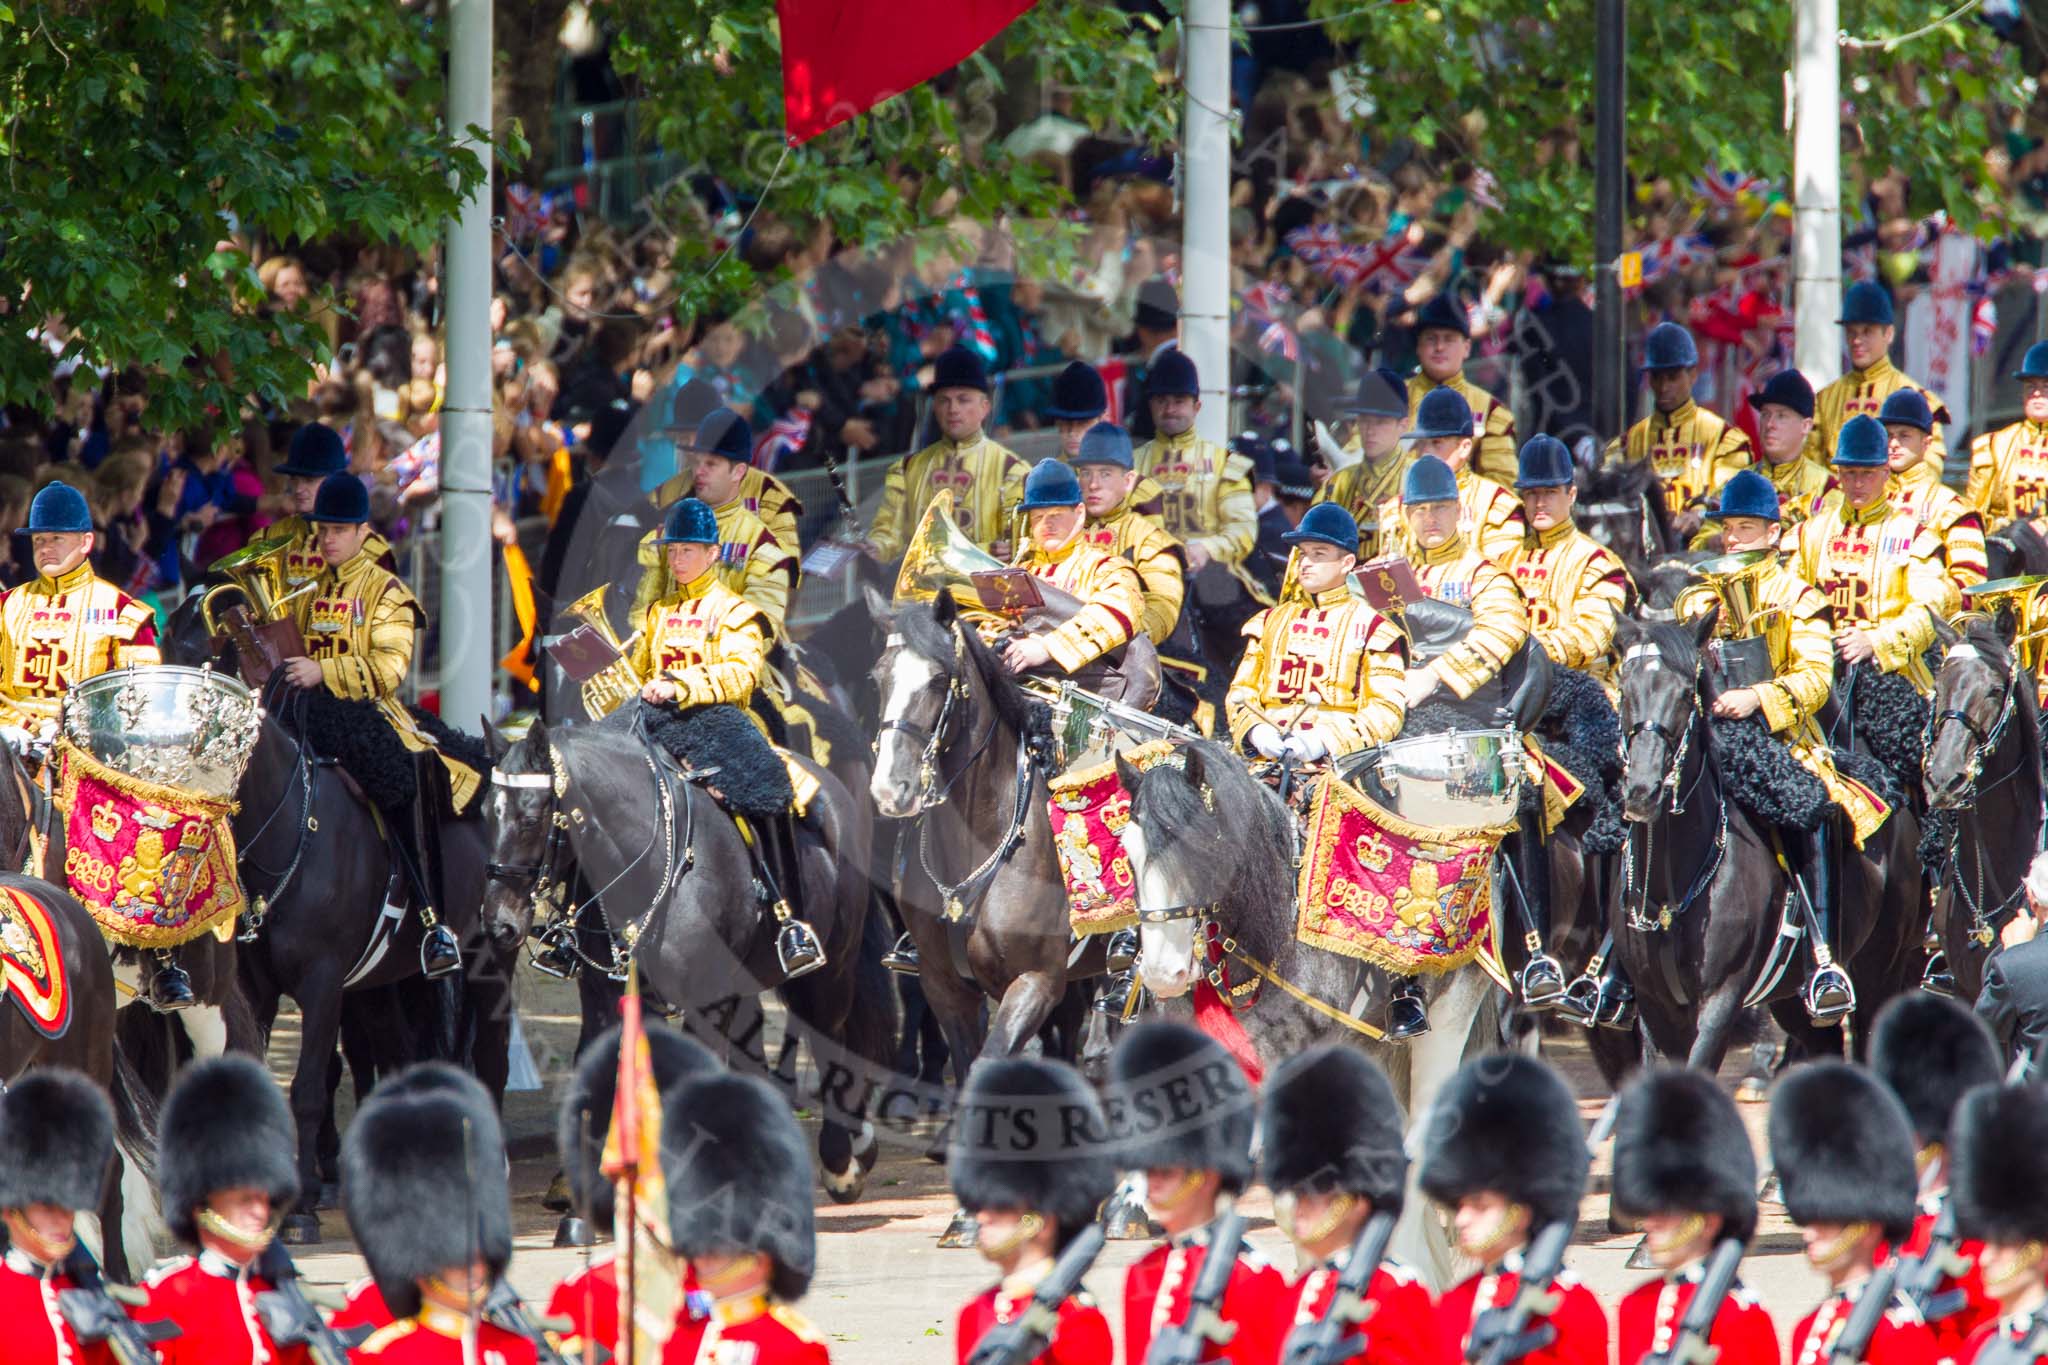 Trooping the Colour 2013: The Mounted Bands of the Household Cavalry are marching down Horse Guards Road as the third element of the Royal Procession, taking position at the northern side of Horse Guards Parade, next to St James's Park. Image #238, 15 June 2013 10:56 Horse Guards Parade, London, UK